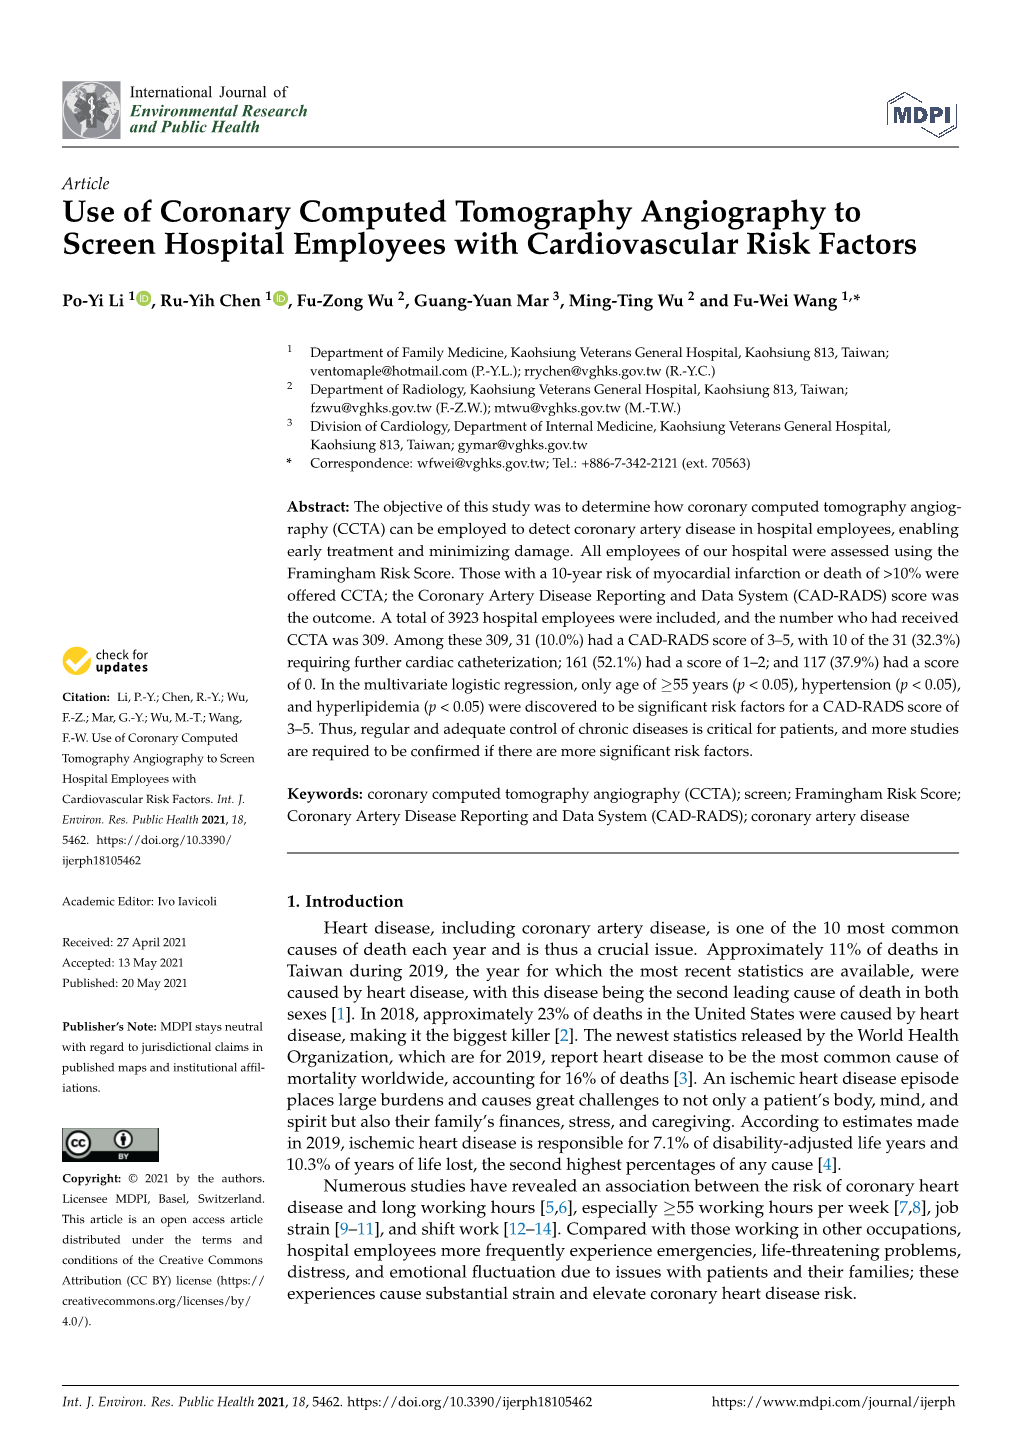 Use of Coronary Computed Tomography Angiography to Screen Hospital Employees with Cardiovascular Risk Factors